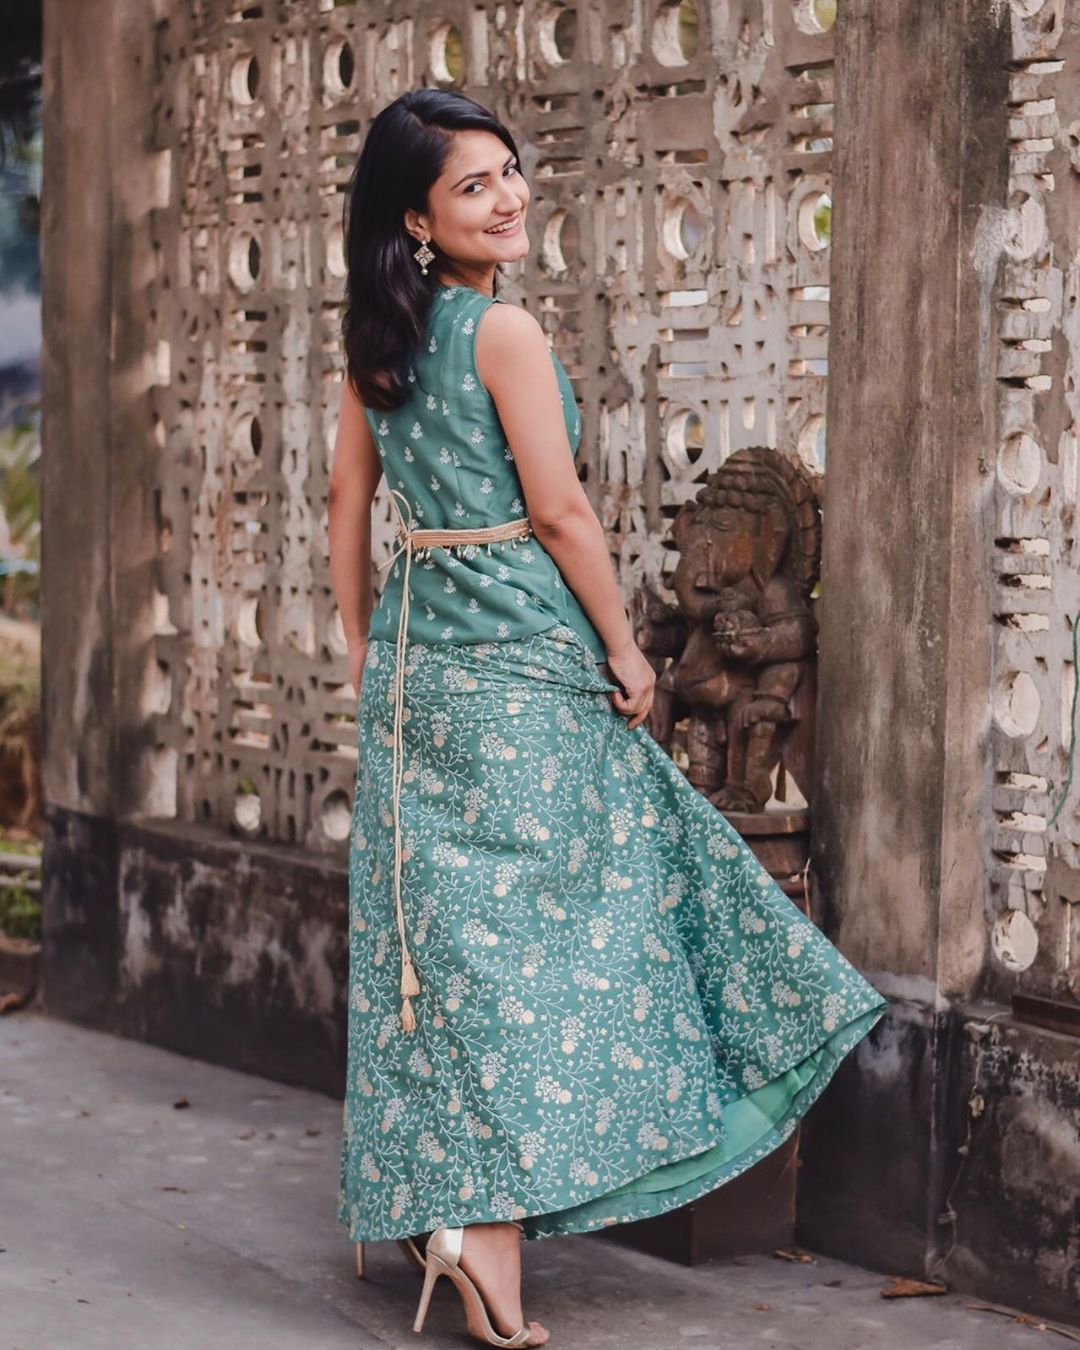 MYNTRA - Dress-up + twirl + pose = a happy click! Just like @manaswineehazarika
Look up product code: 11093814 
For more style inspiration, look up the binge-worthy fashion content at #MyntraStudio on...